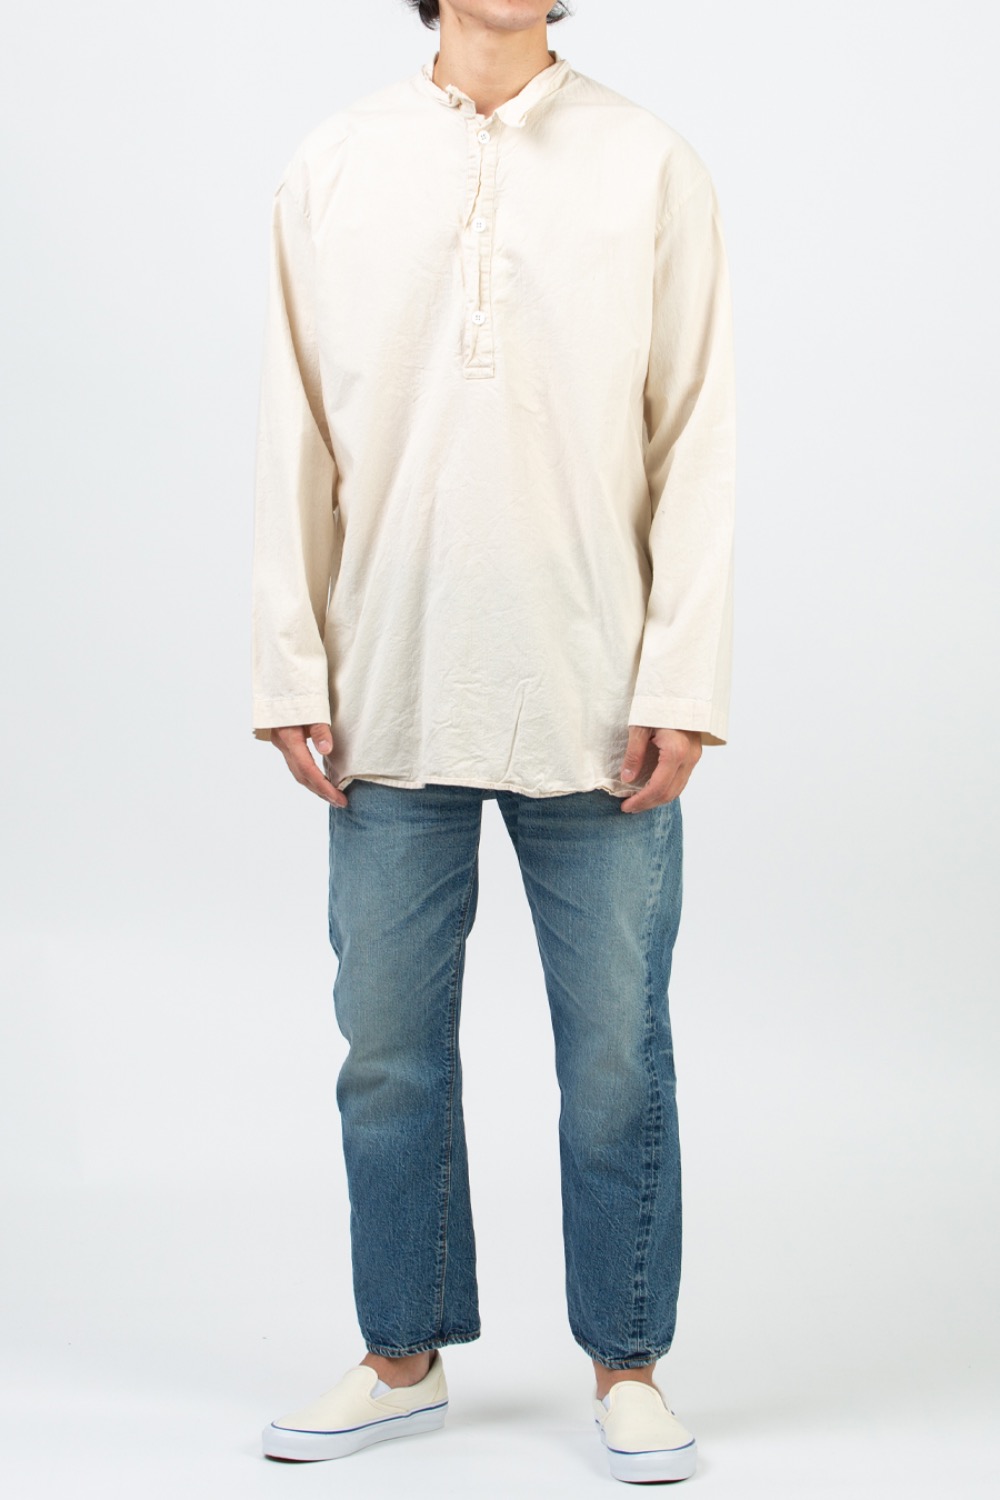 WEAVER&#039;S STOCK PULLOVER TAIL SHIRT UPHOLSTERY CALICO WHITE